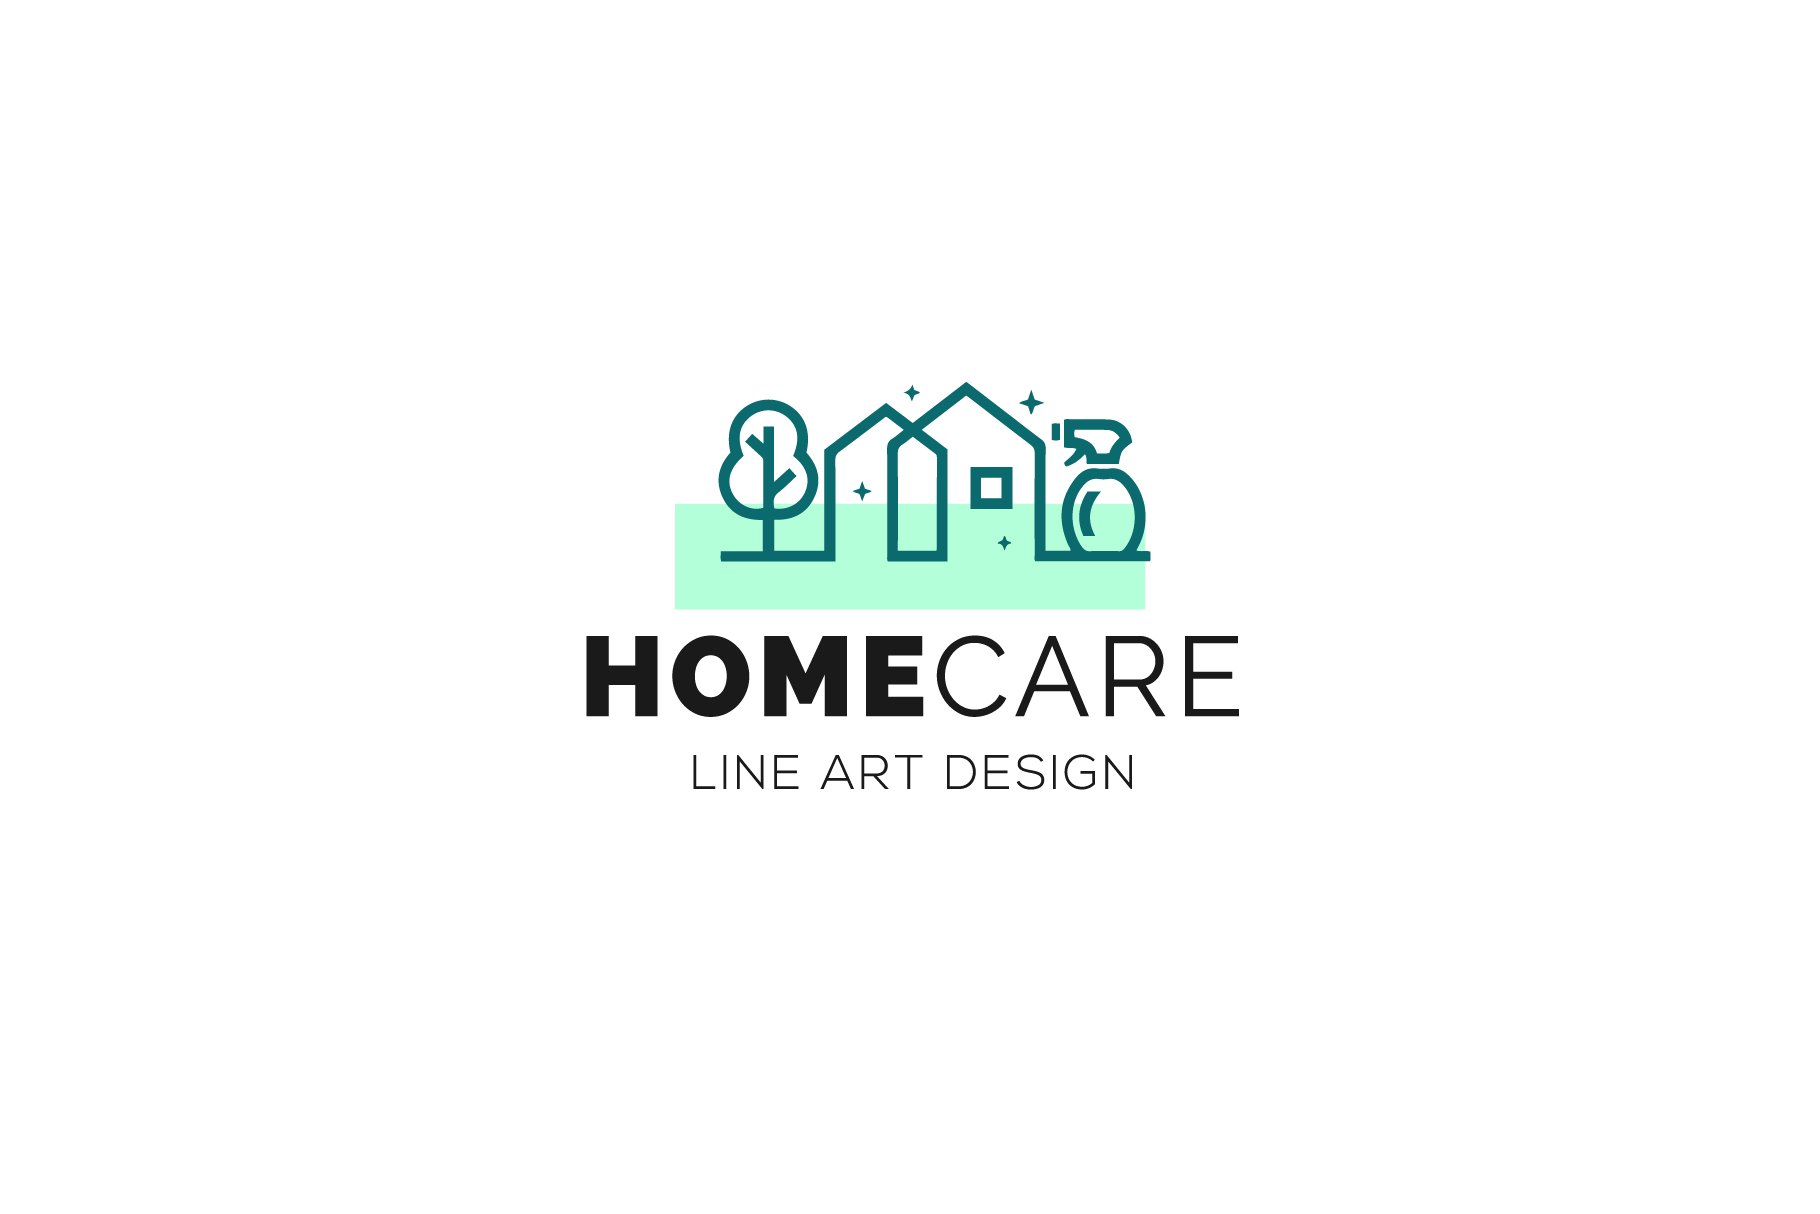 Clean Home spry Logo Template Design cover image.